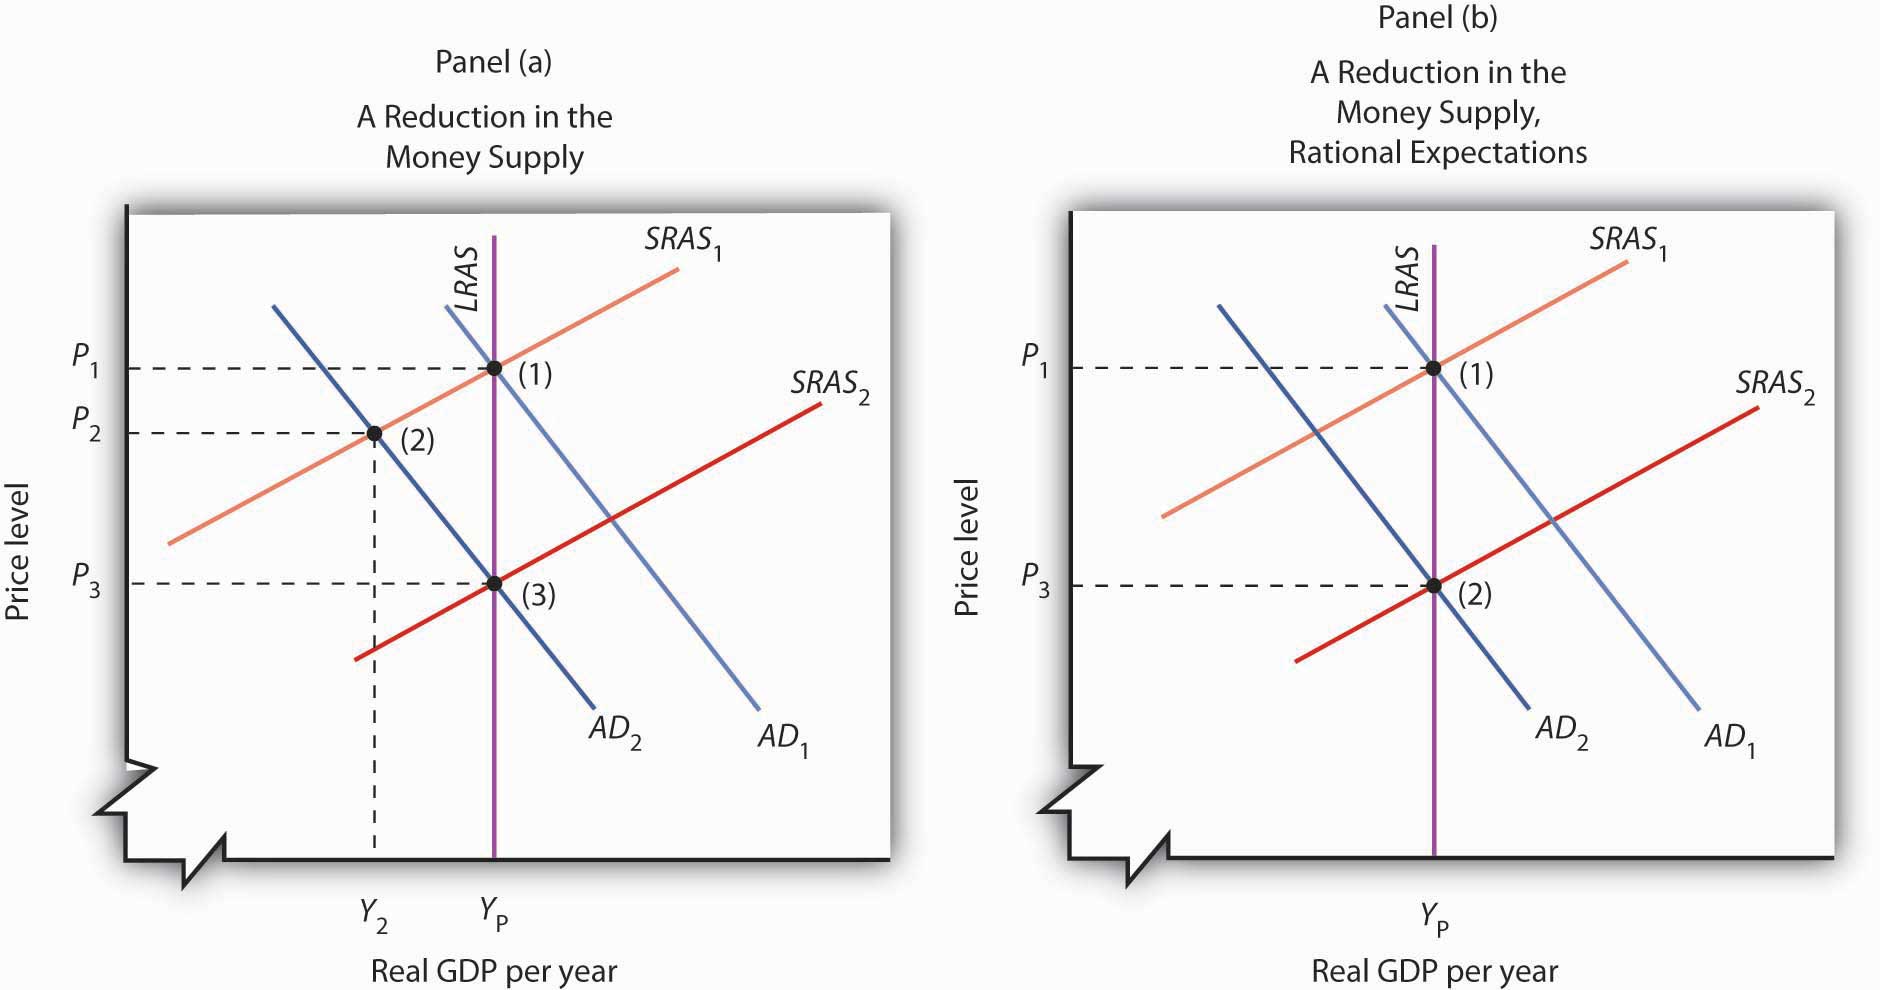 Contractionary Monetary Policy: With and Without Rational Expectations